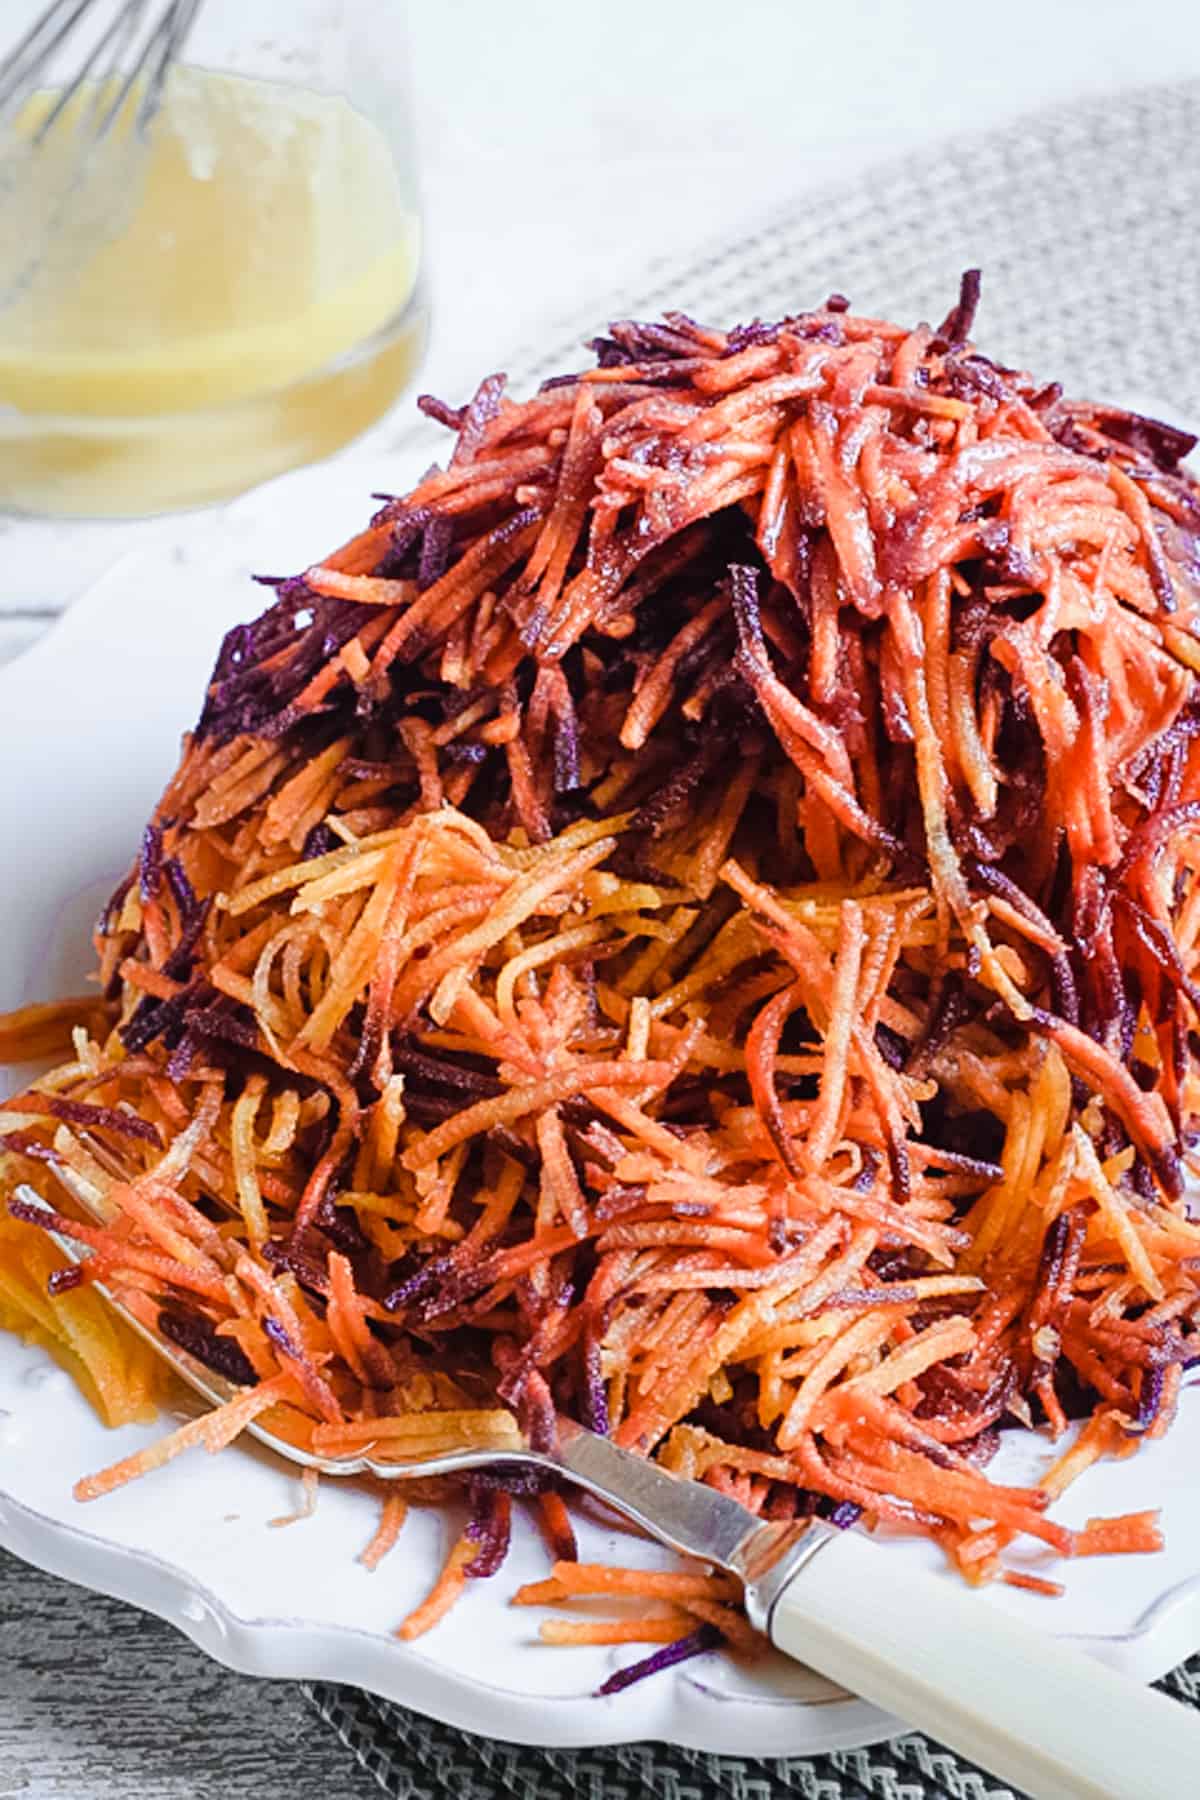 Carrot Salad on a plate with a fork